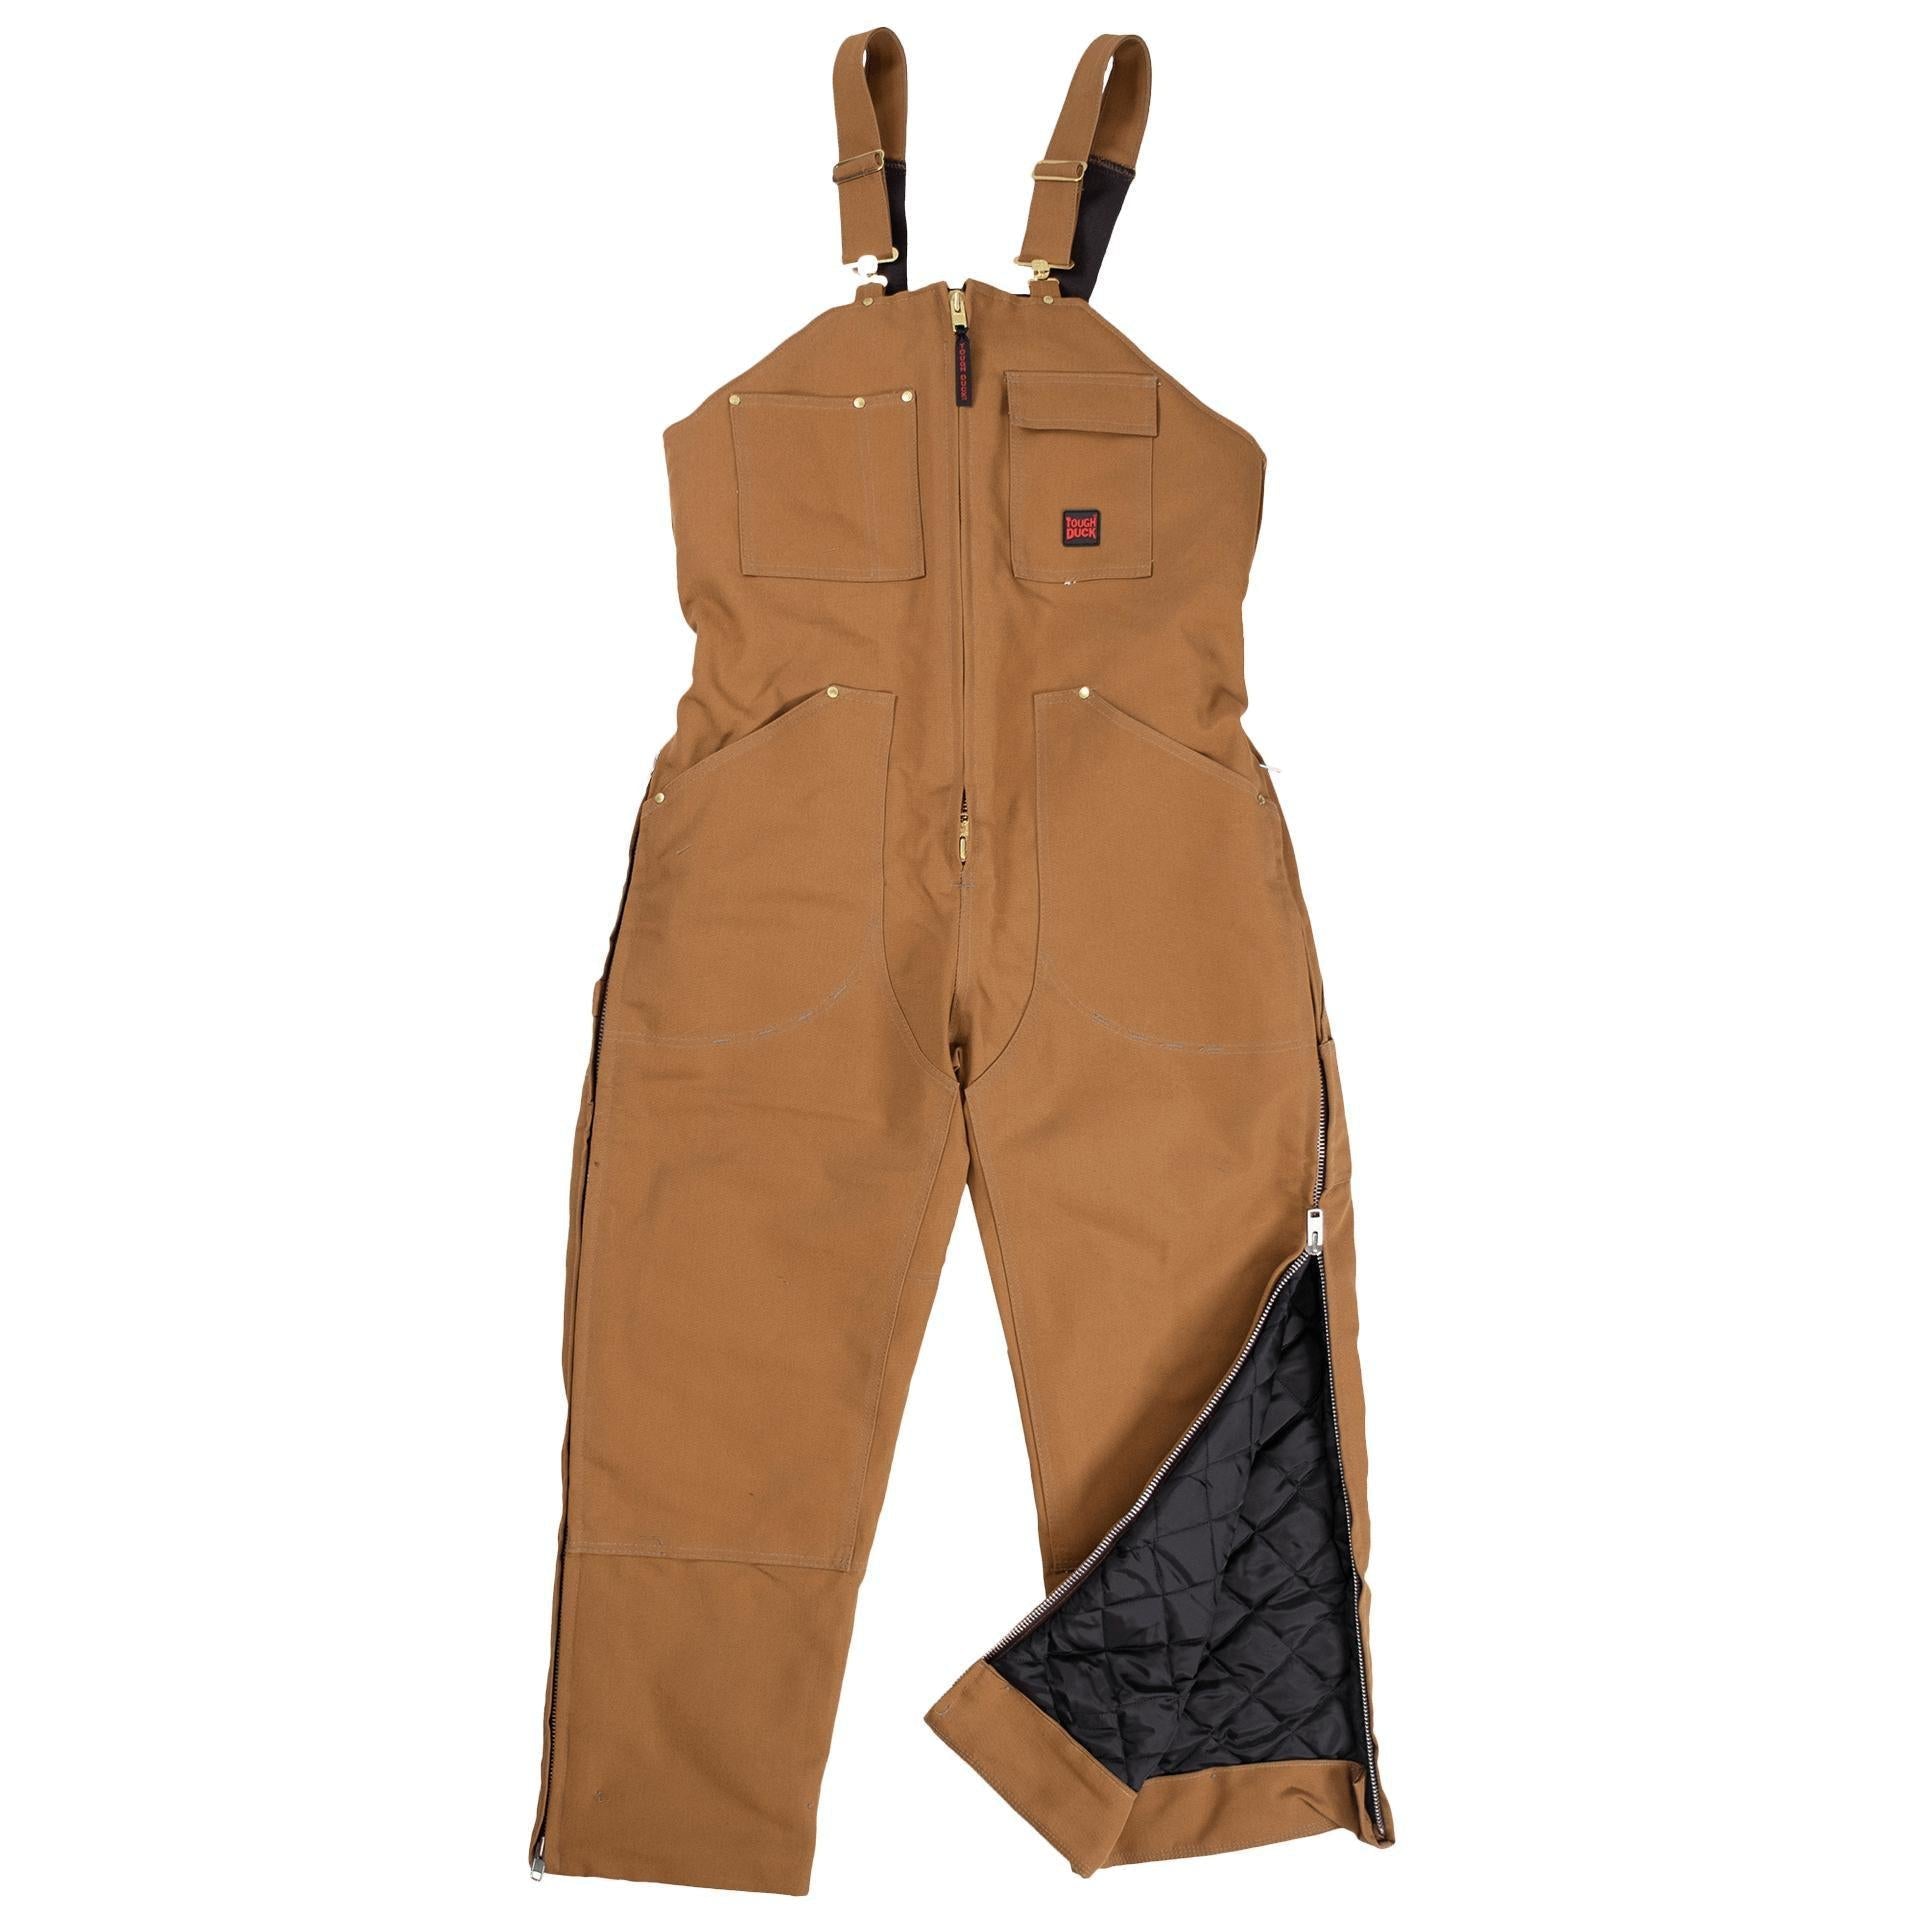 Deluxe Tough Duck dubbed overalls